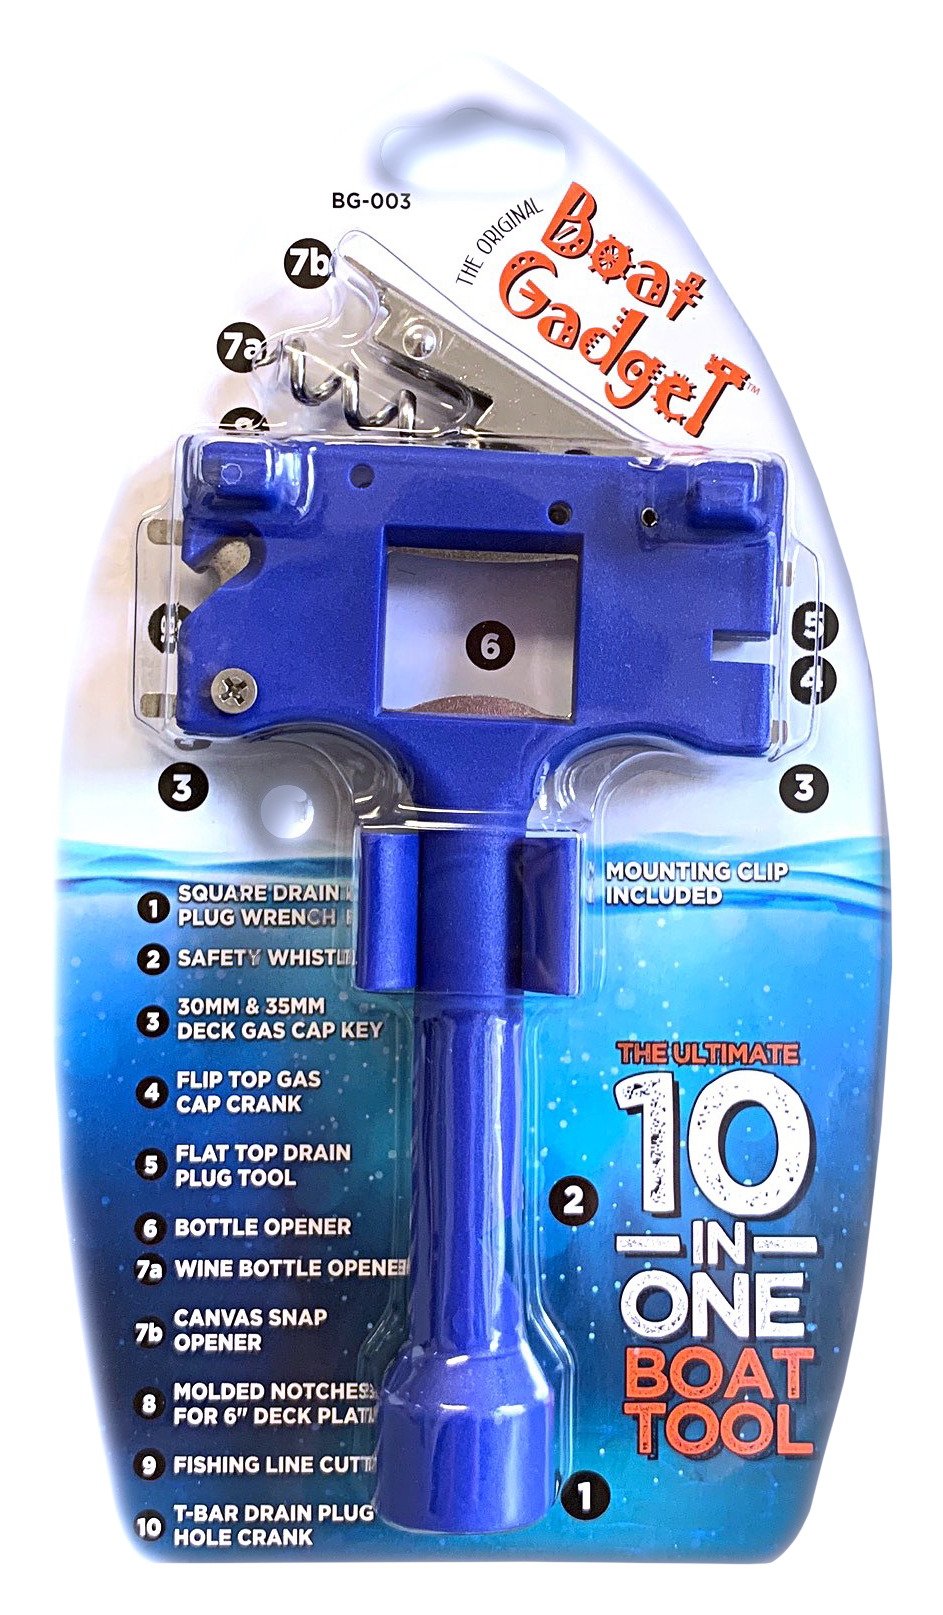 Boat Gadget – This 10-in-1 Boat Tool Includes Beer and Wine Bottle Opener, Safety Whistle, Fishing Line Cutter, Marine Gas Cap Key & Other Essential